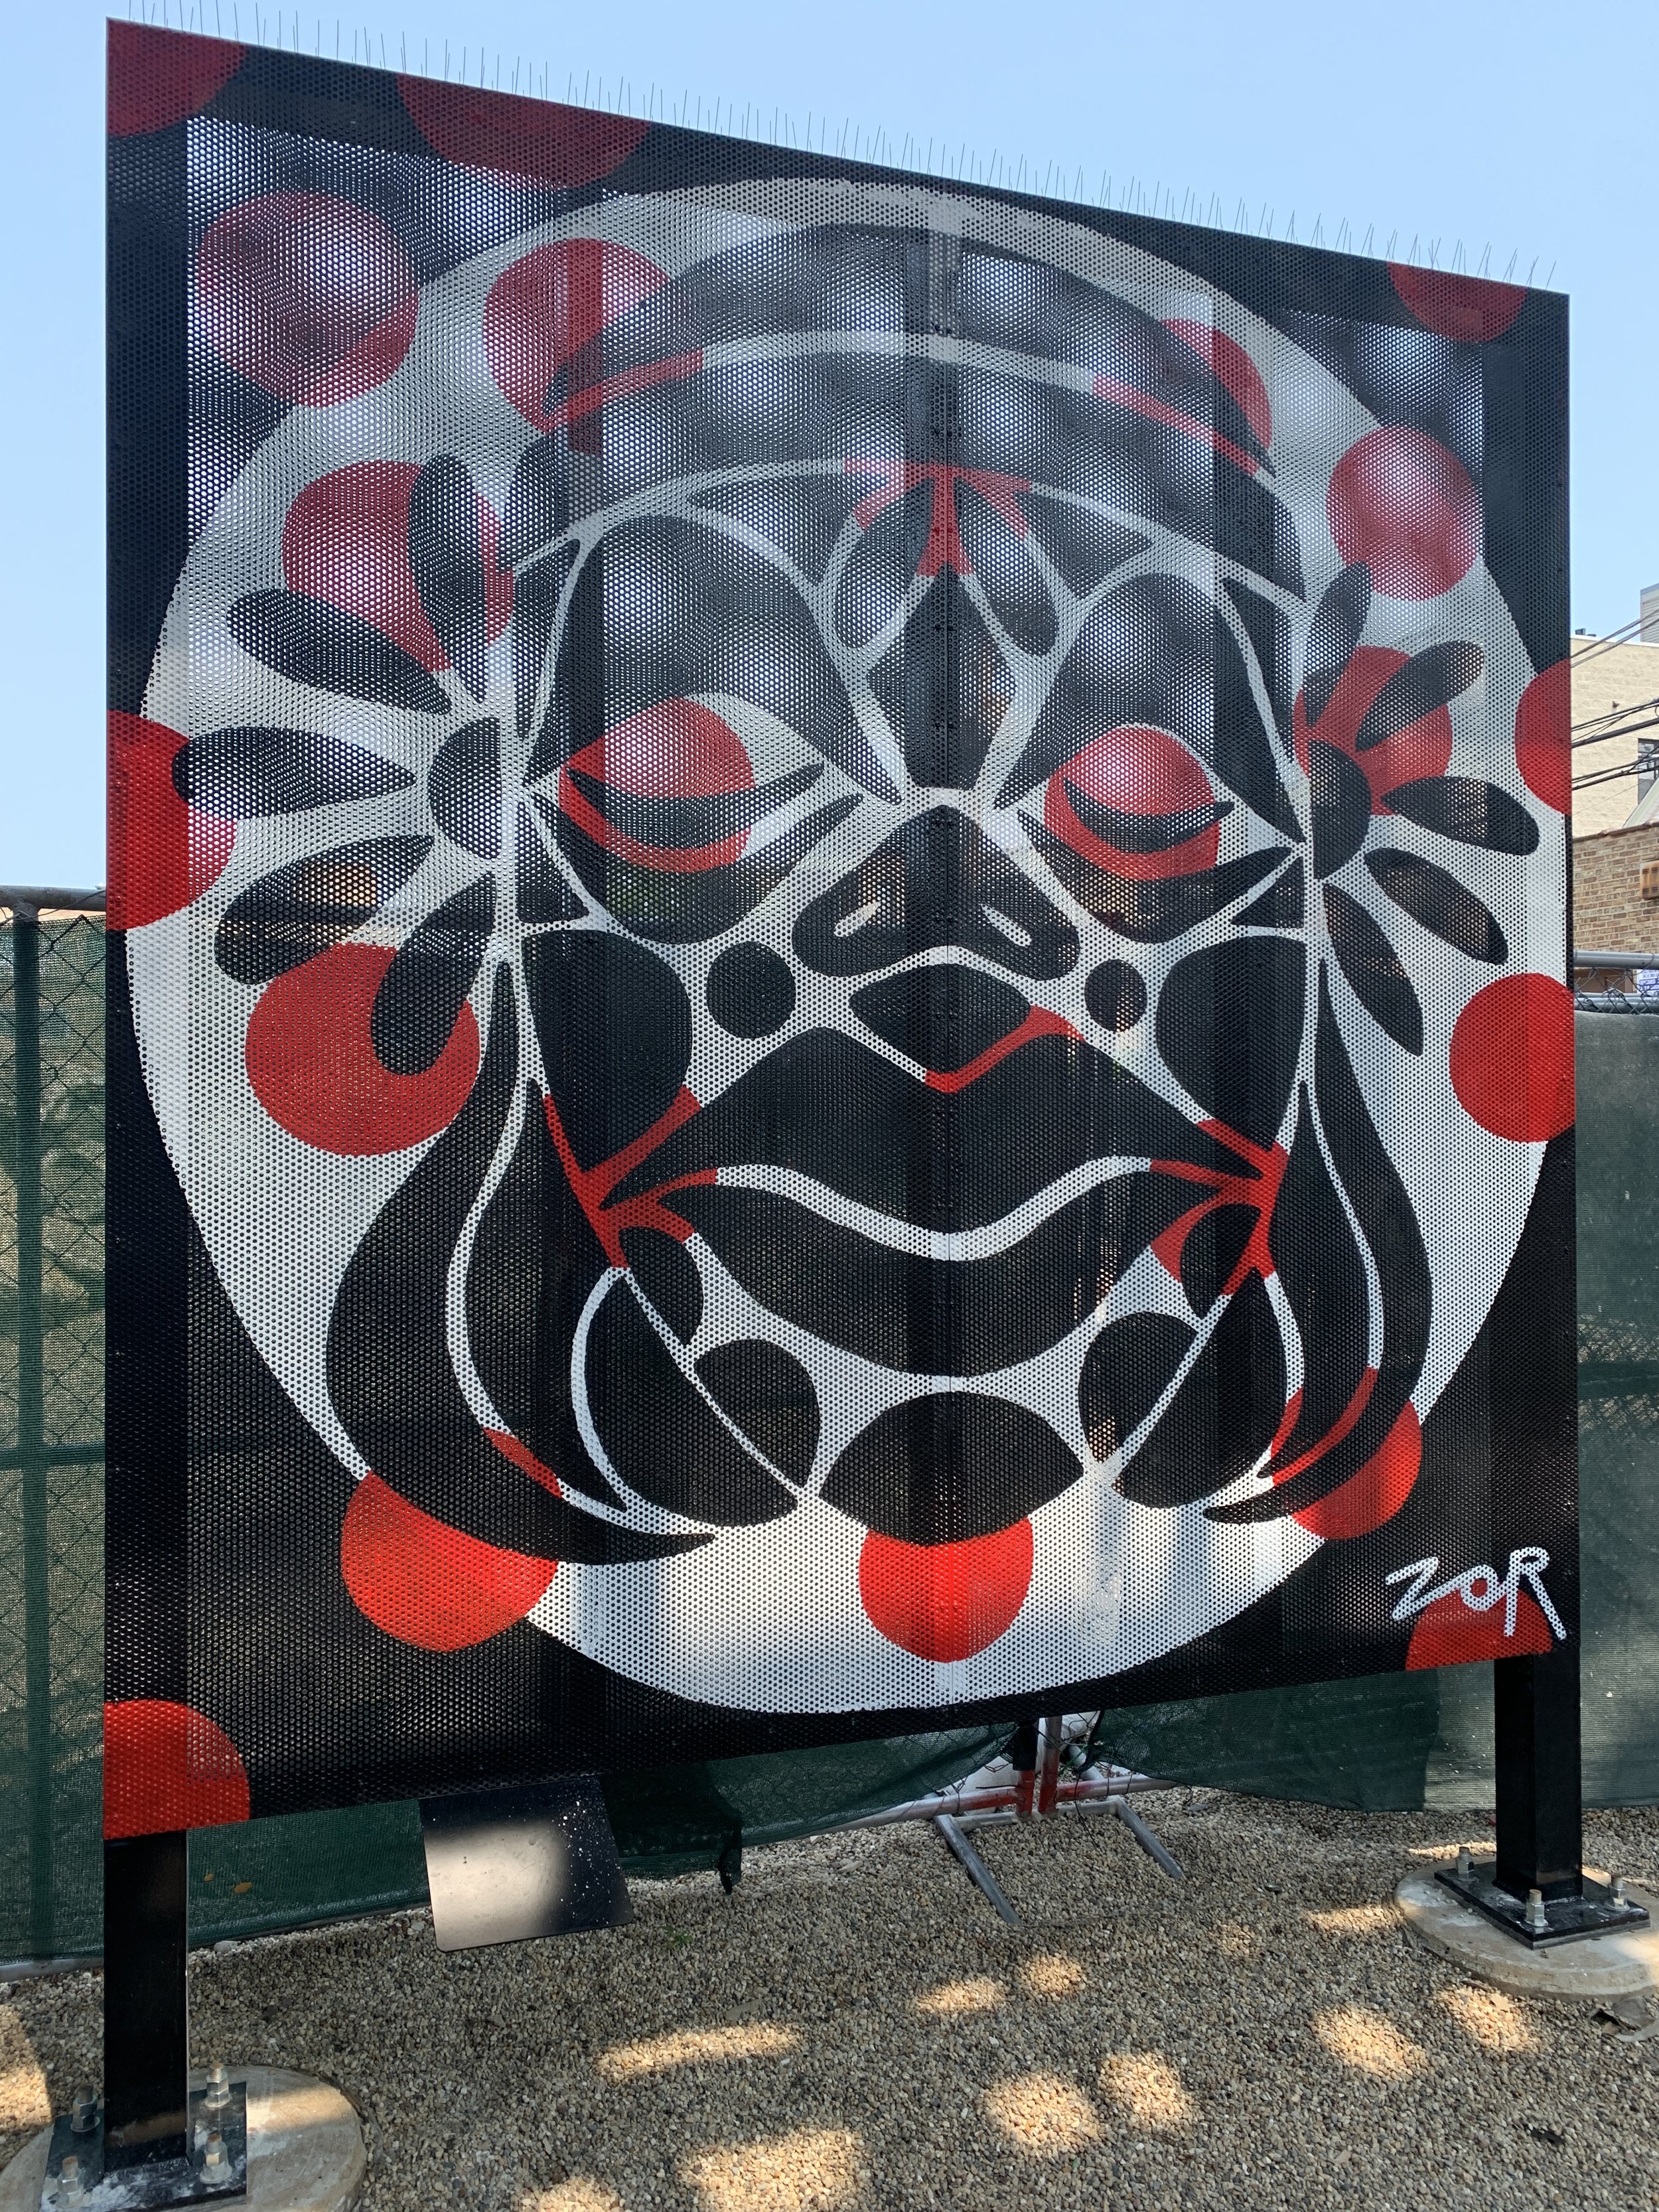 The Face, Zor Zor Zor (2021-2022): 3410 N. Ashland Ave.  “当我刚开始发展自己的风格时, 我喜欢把不同的形状和设计拼在一起，创造出这些像面具一样的角色. Many of my paintings are just in black and white; the s